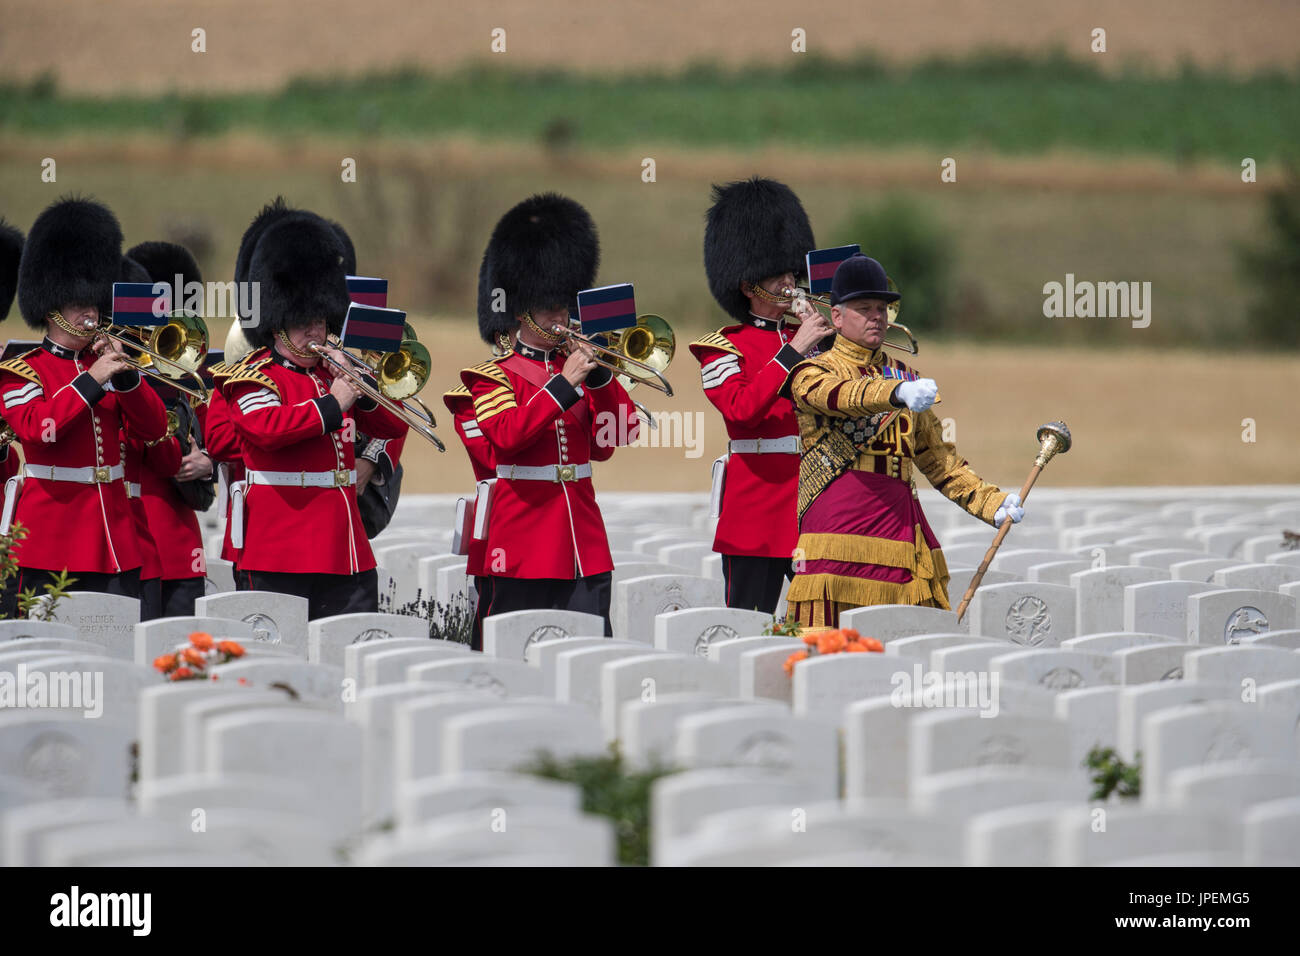 British Troops take part in the commemoration events for the World War One Battle of Passchendaele at the Tyne Cot Cemetery near Ypres in Belgium. The military band of the Irish Guards. Stock Photo